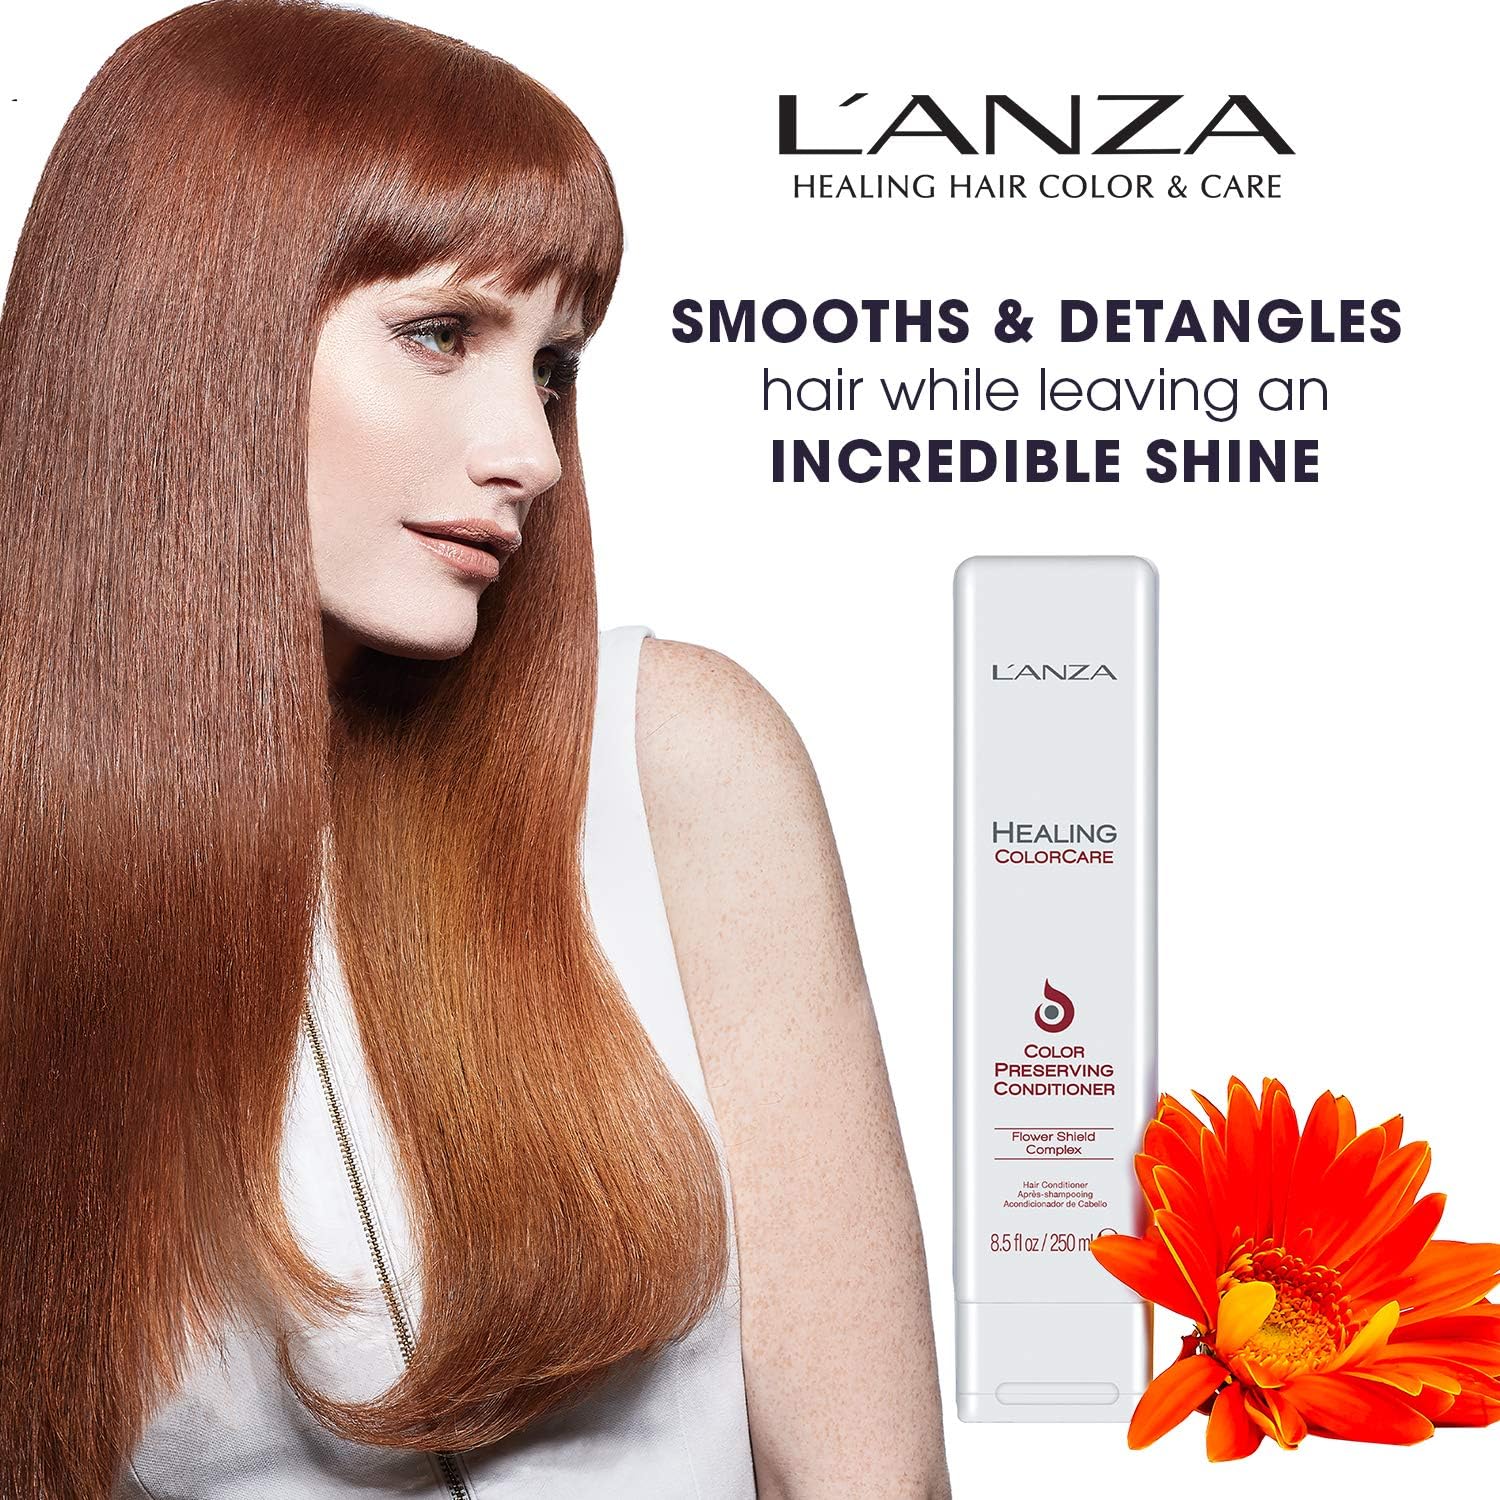 L'ANZA Healing ColorCare Holiday Gift Set Trio, Color-Preserving Shampoo, Conditioner & Trauma Treatment Deep Conditioning Hair Oil in Gift Box, Hair Care for Dry, Damaged Hair (10.1/8.5/5.1 Fl Oz)